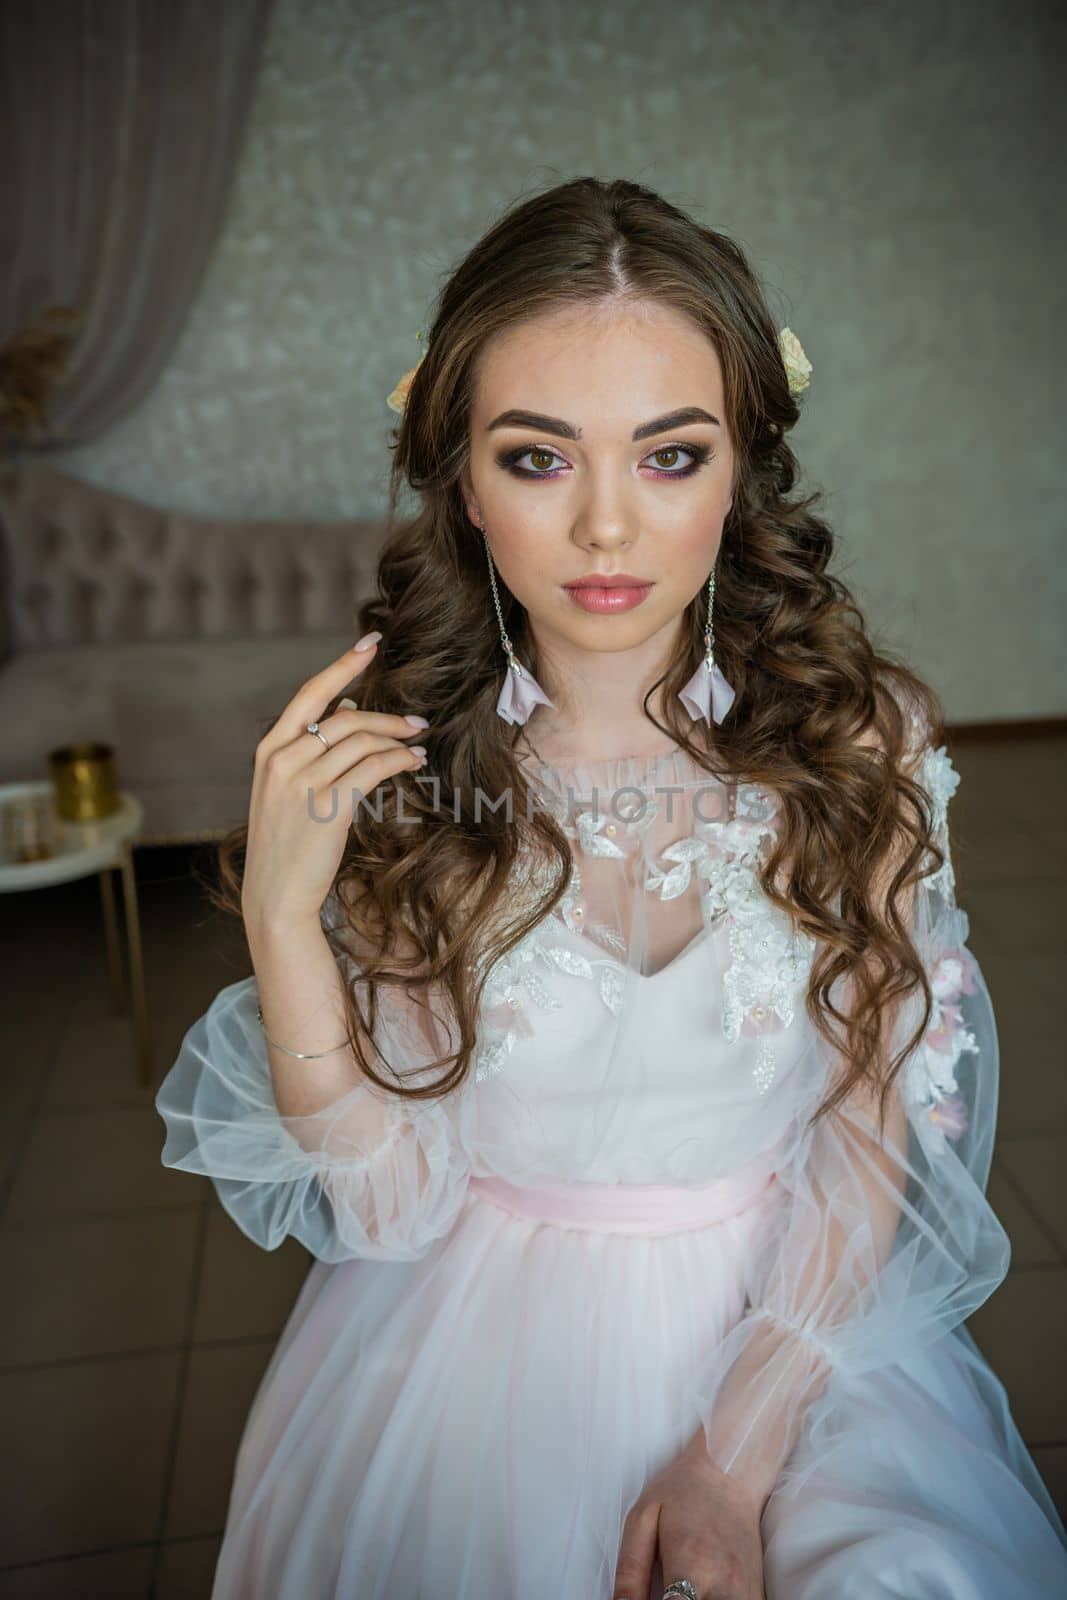 Beautiful makeup for a young bride girl. by DovidPro